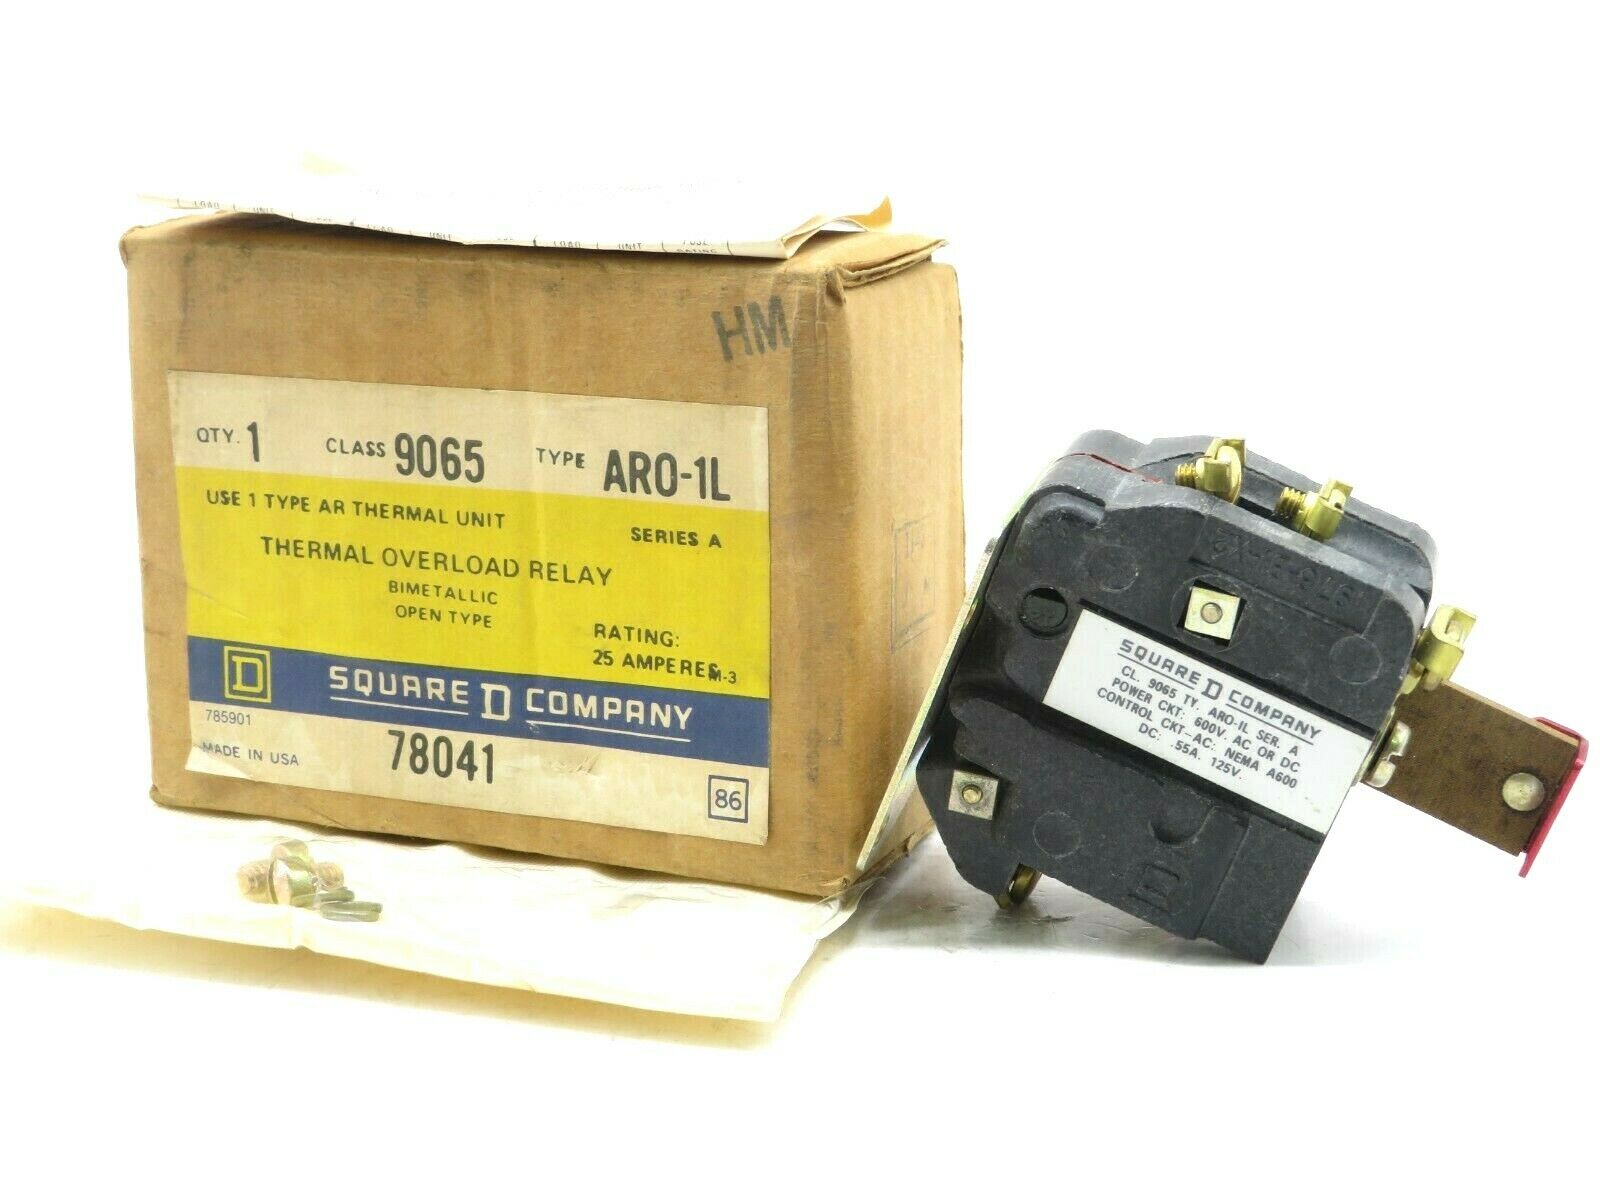 SQUARE D 9065 ARO-1L THERMAL OVERLOAD RELAY Ser A Class 9065 Type ARO-L 